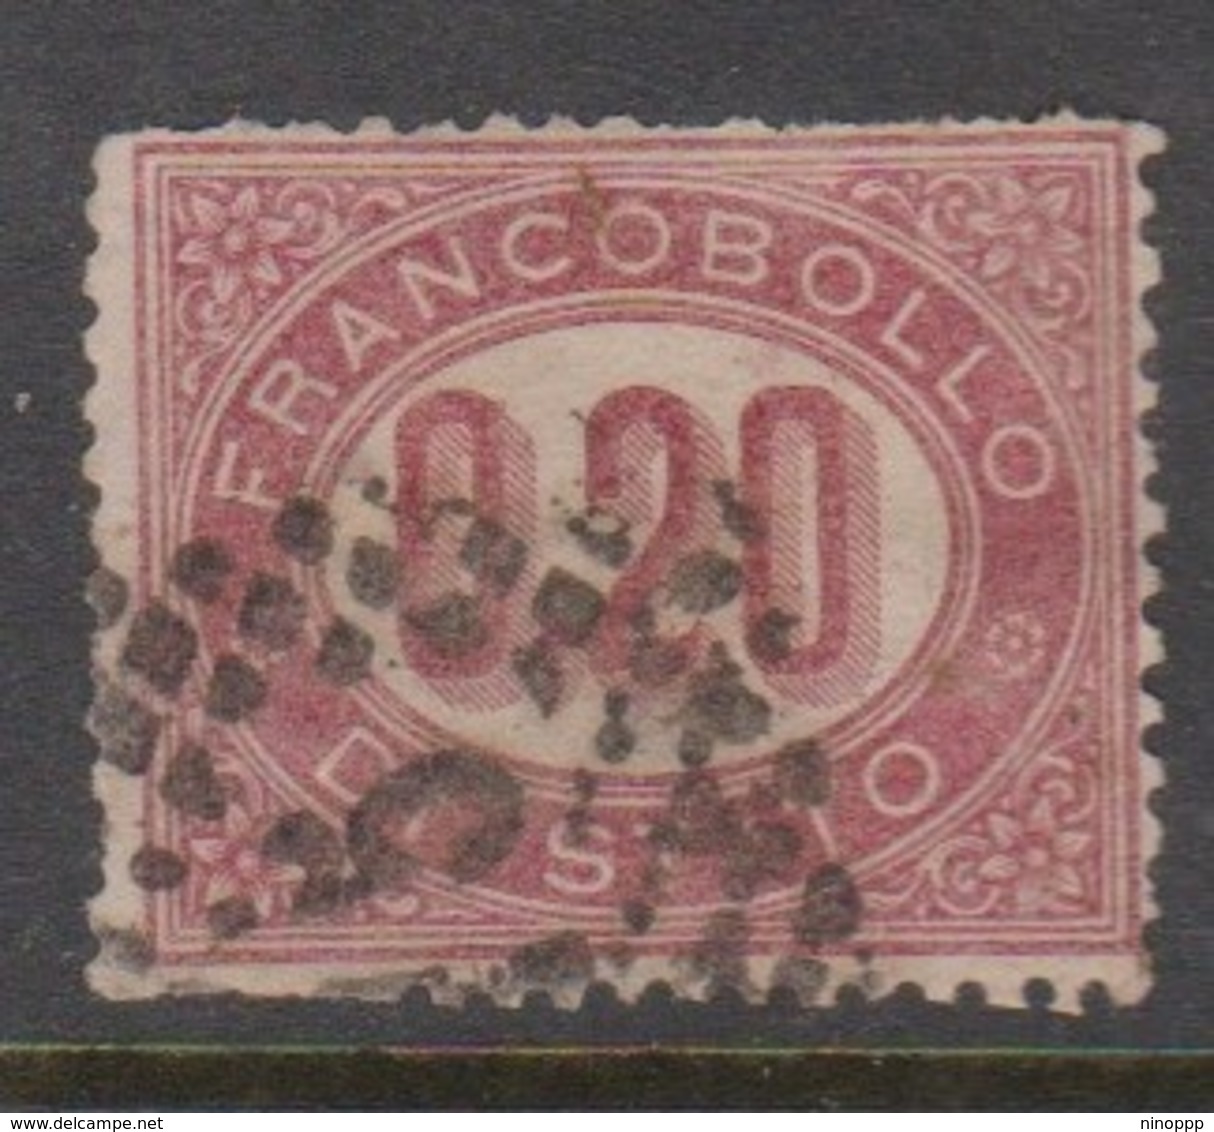 Italy O 3 1875 Official Stamp,20 Cents Lake,used - Officials